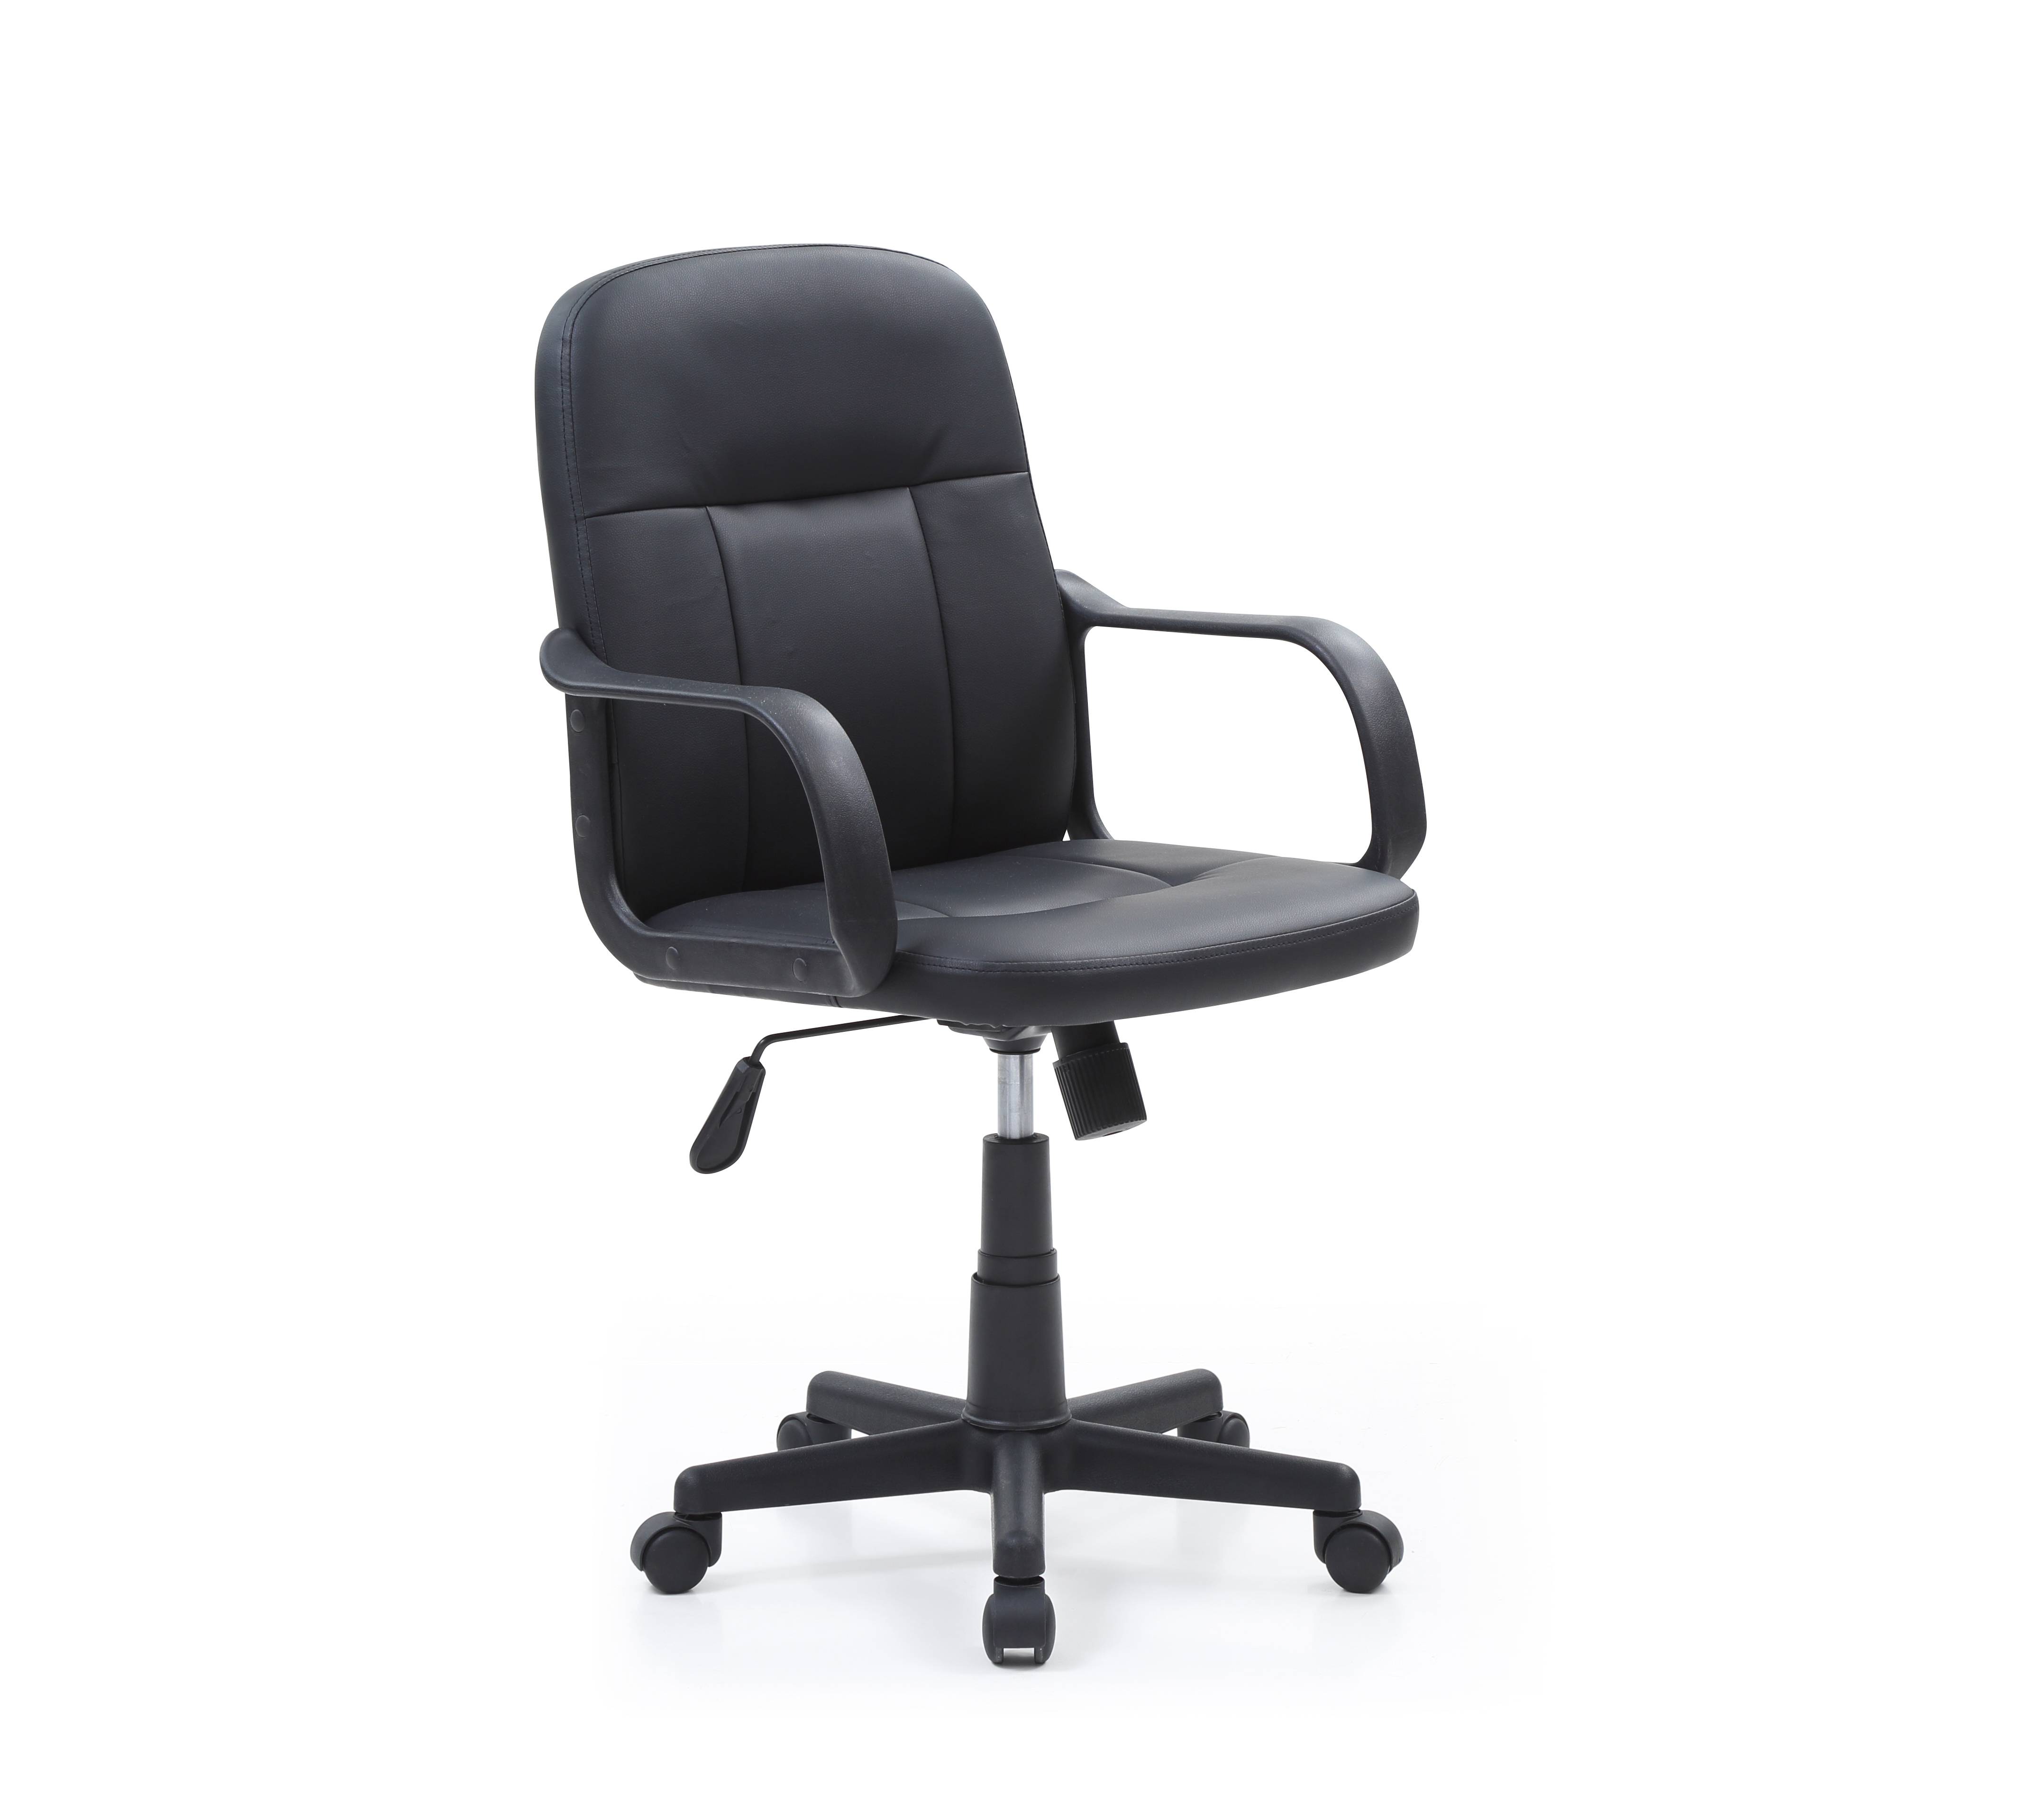 Hodedah 19.5 in Manager's Chair with Adjustable Height & Swivel, 200 lb. Capacity, Black - image 1 of 5